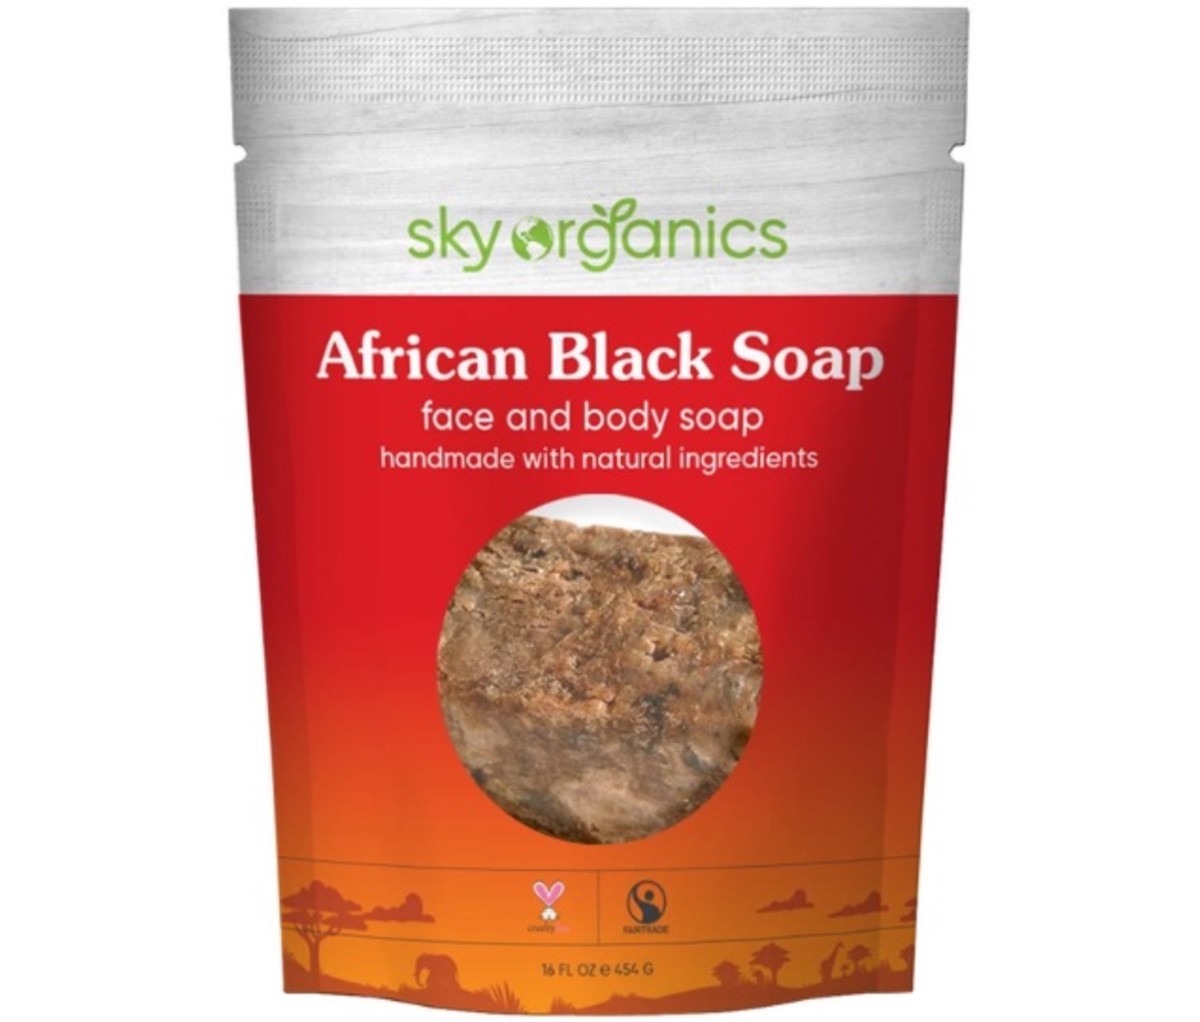 The African black soap from Sky Organics